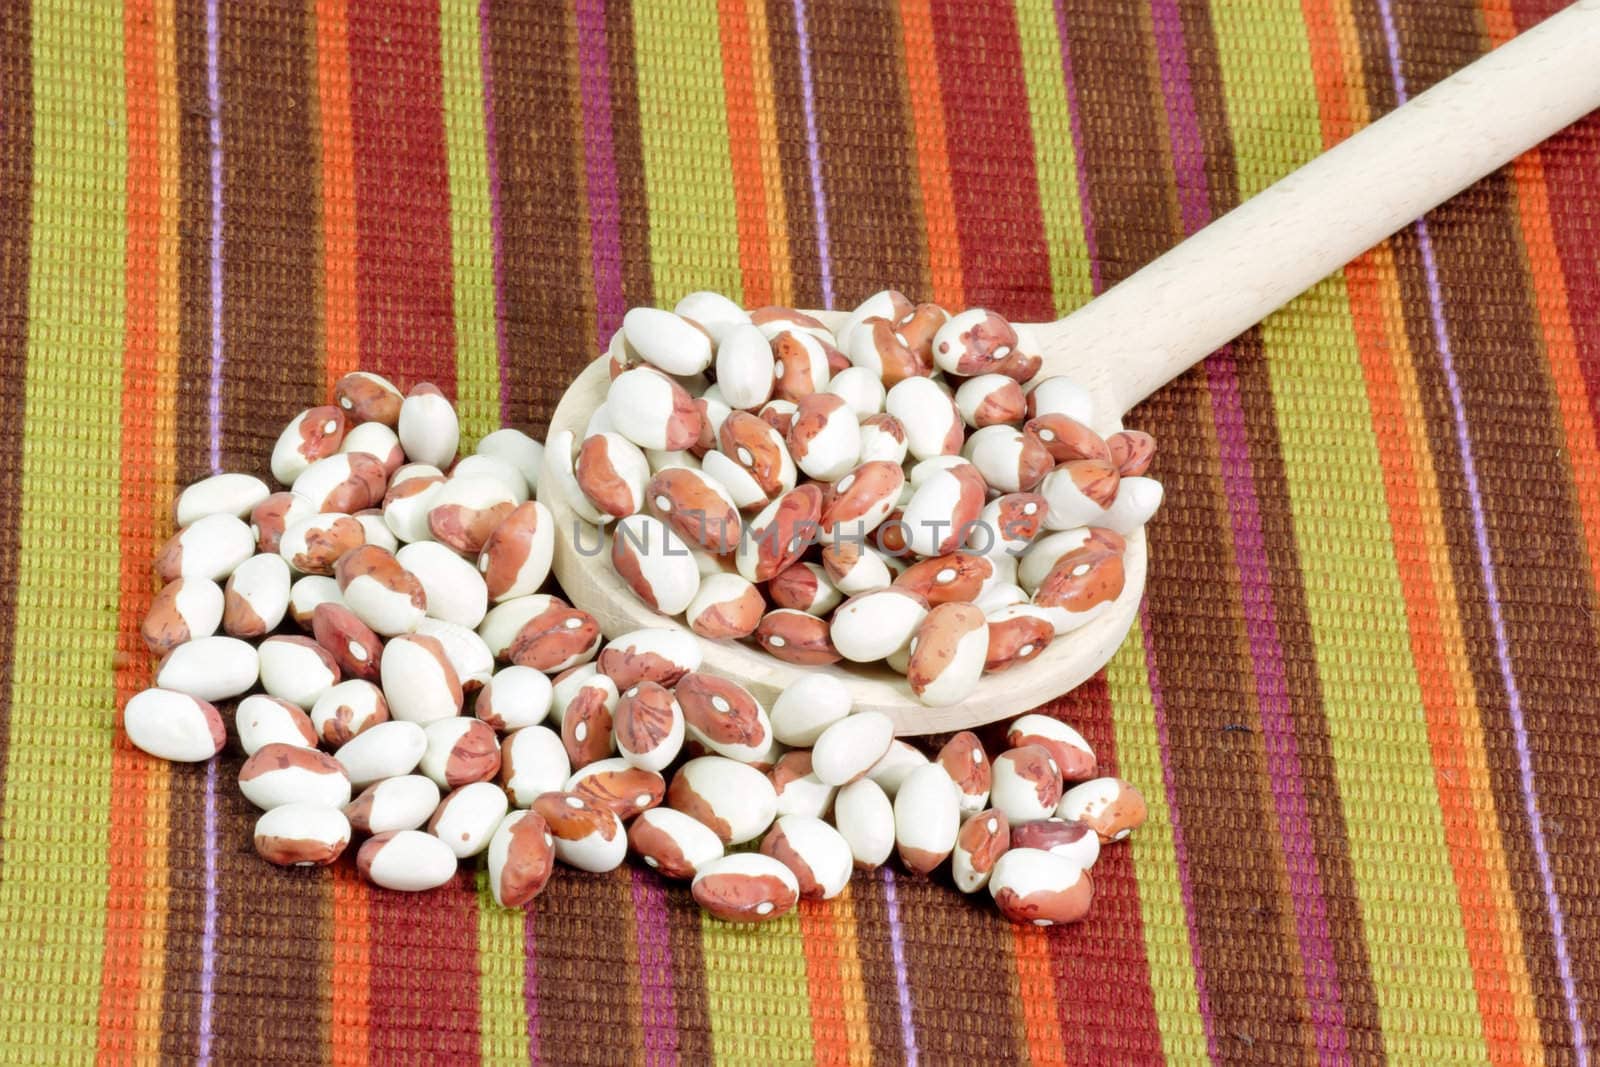 Red and white beans on a cooking spoon as background